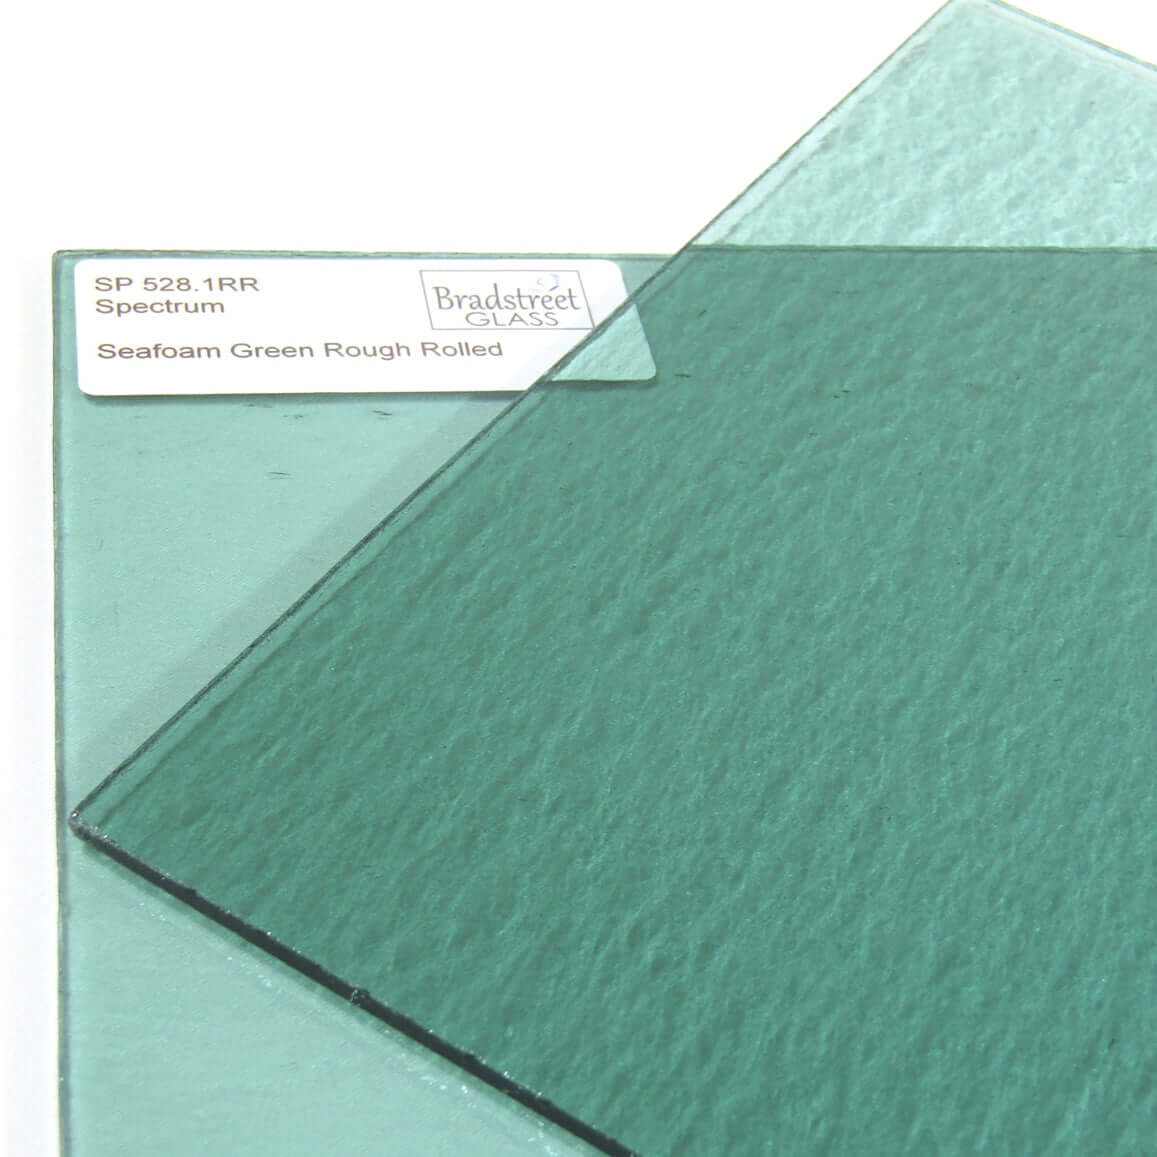 Seafoam Green Rough Rolled Cathedral Stained Glass Sheet Spectrum 528.1RR